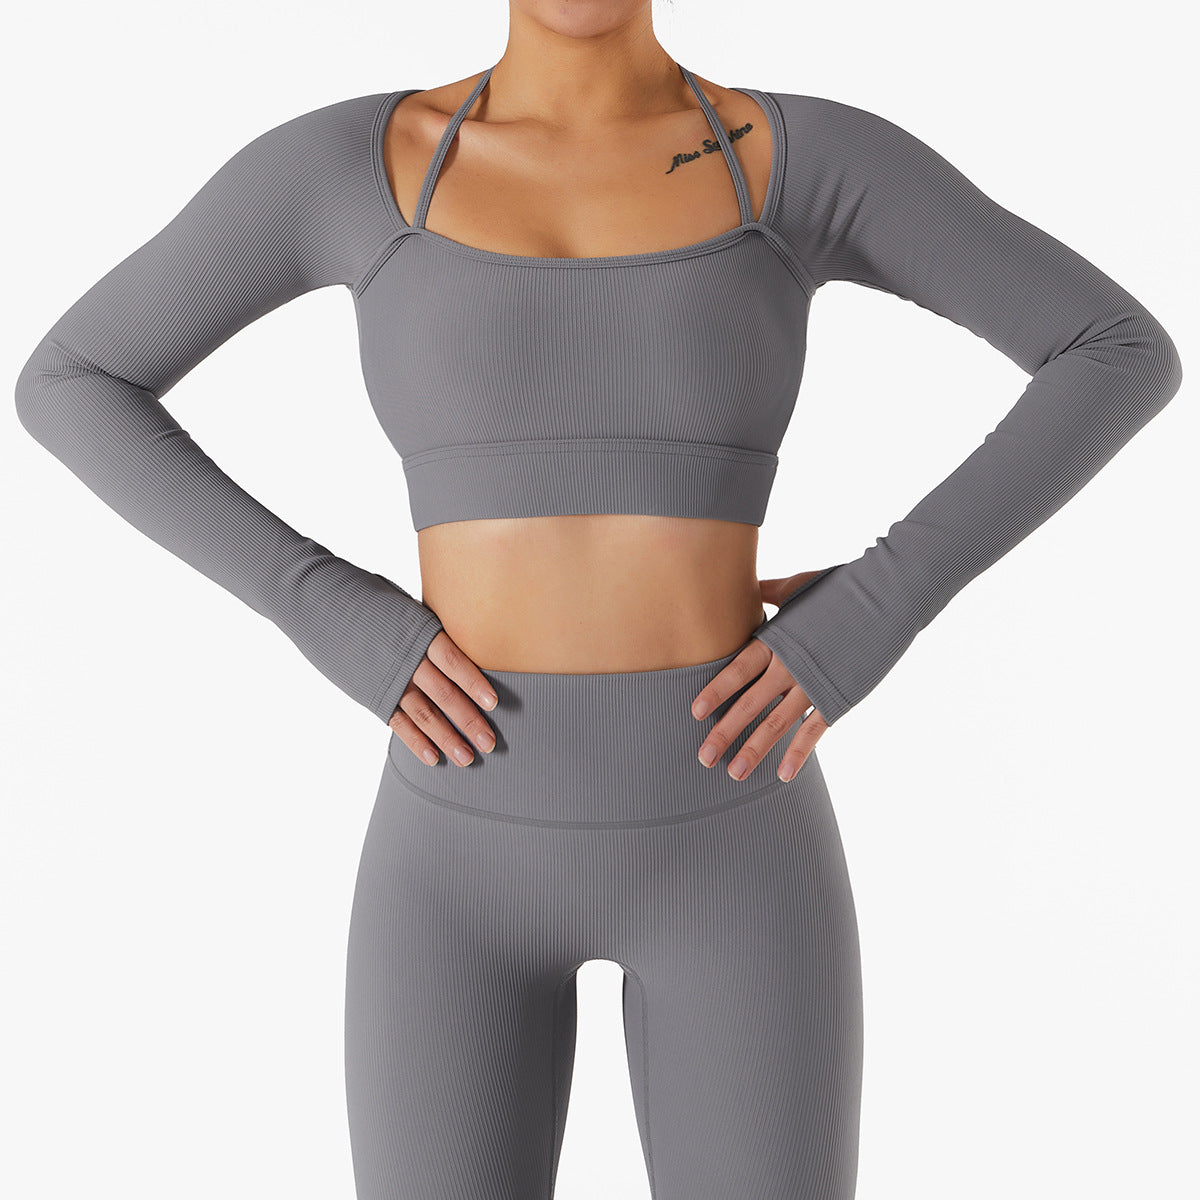 Workout Aesthetic | White Off Shoulder Sports Bra with Sleeves